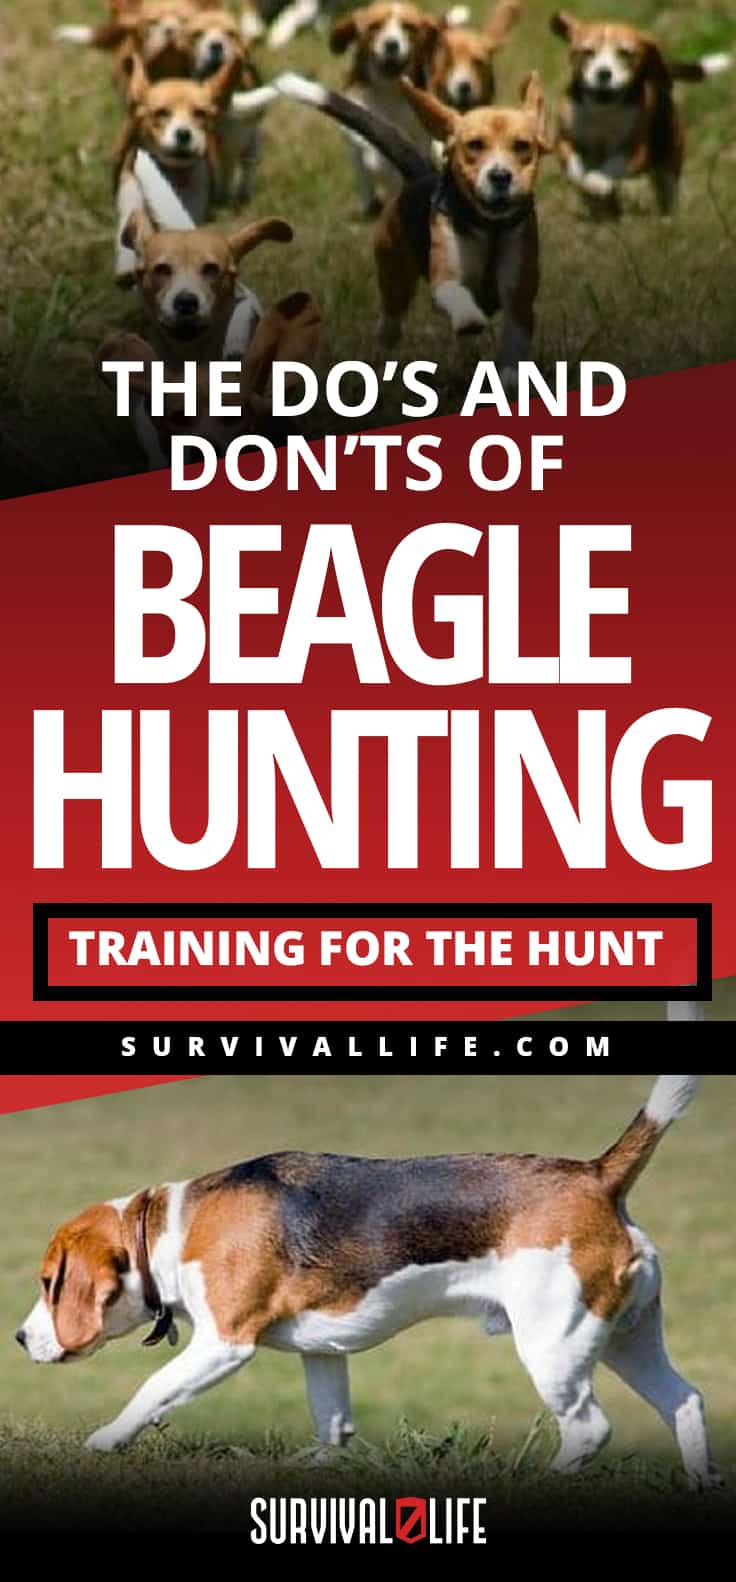  The Do's And Don’ts Of Beagle Hunting - Training For The Hunt | https://survivallife.com/beagle-hunting/